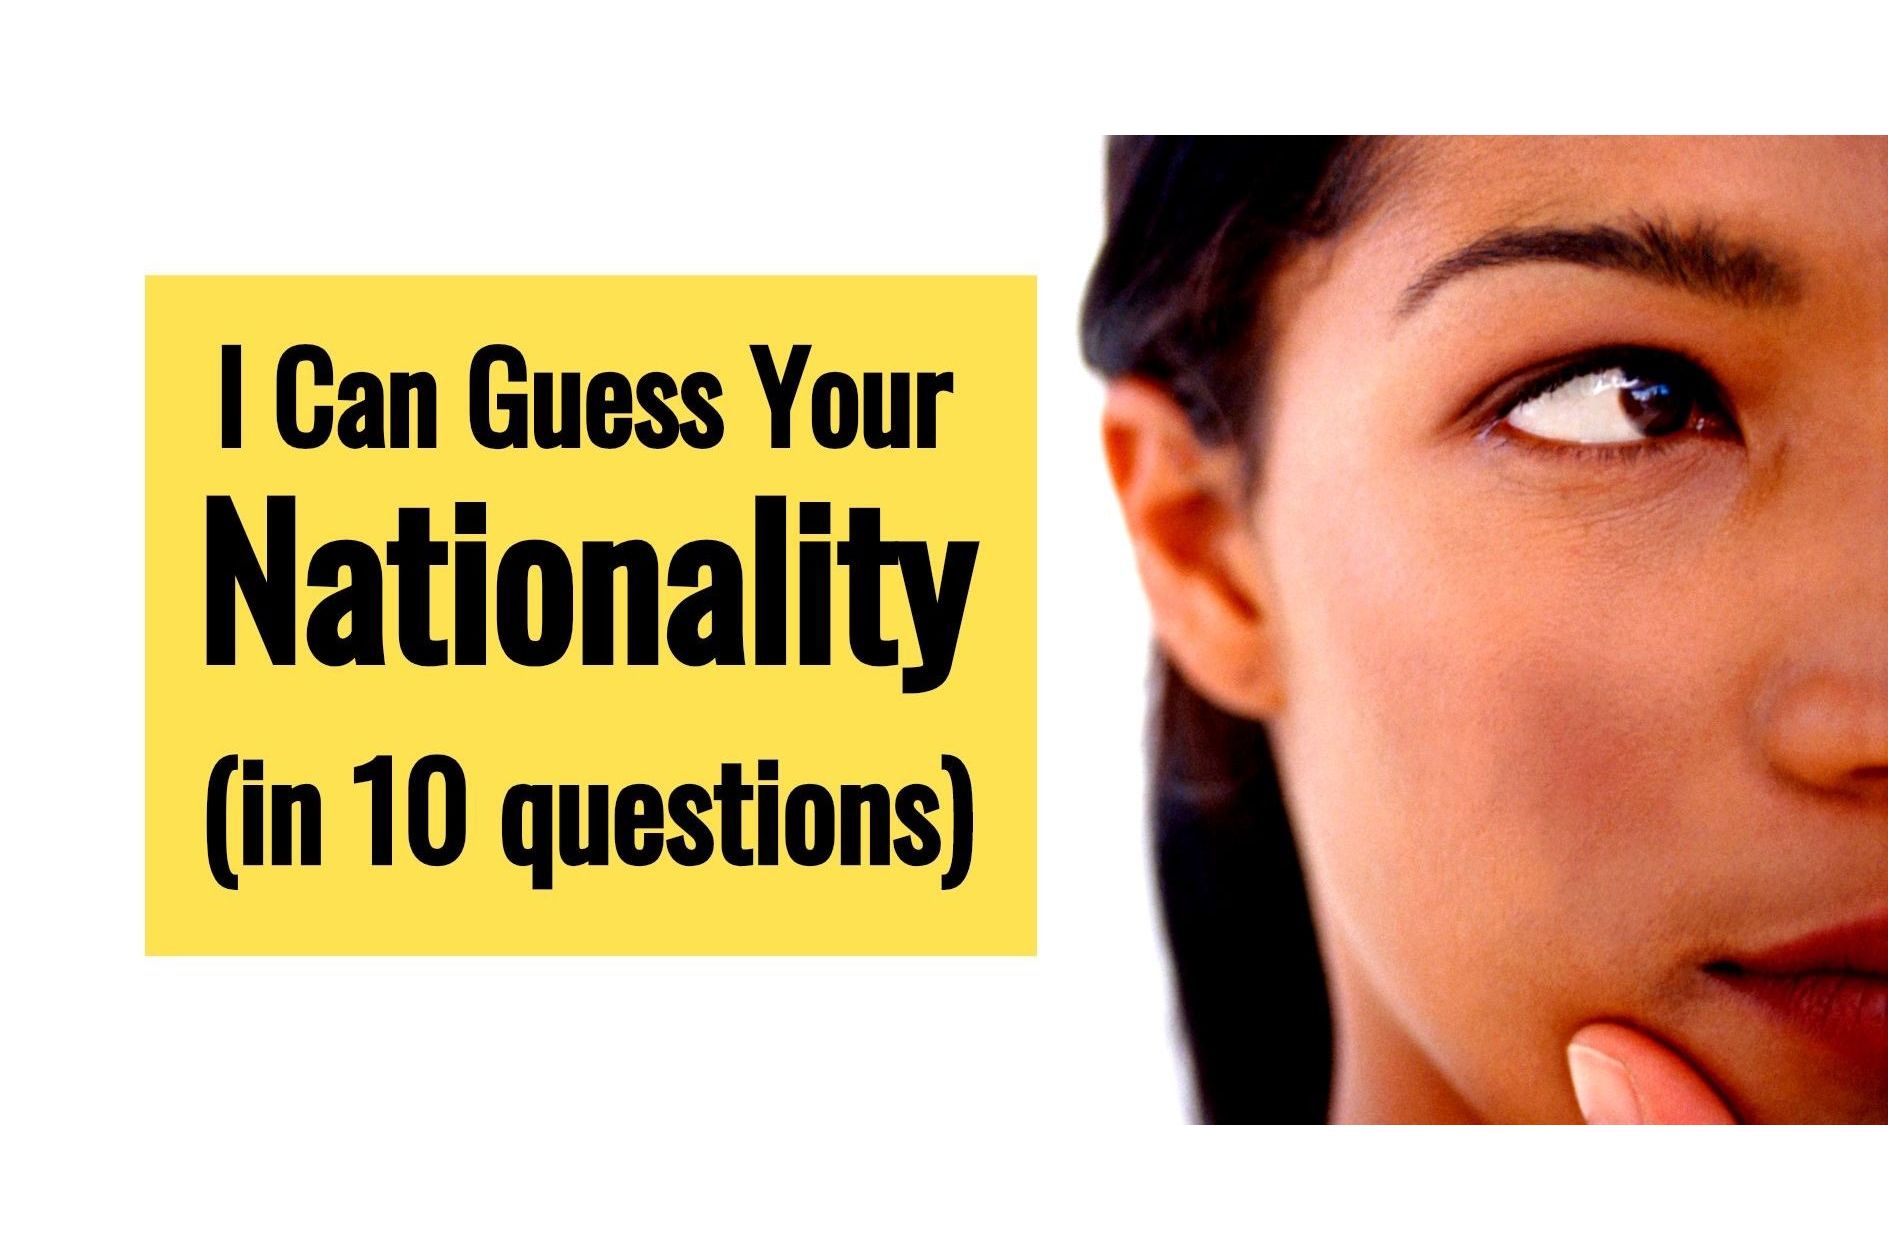 Can Accurately Guess Your Nationality